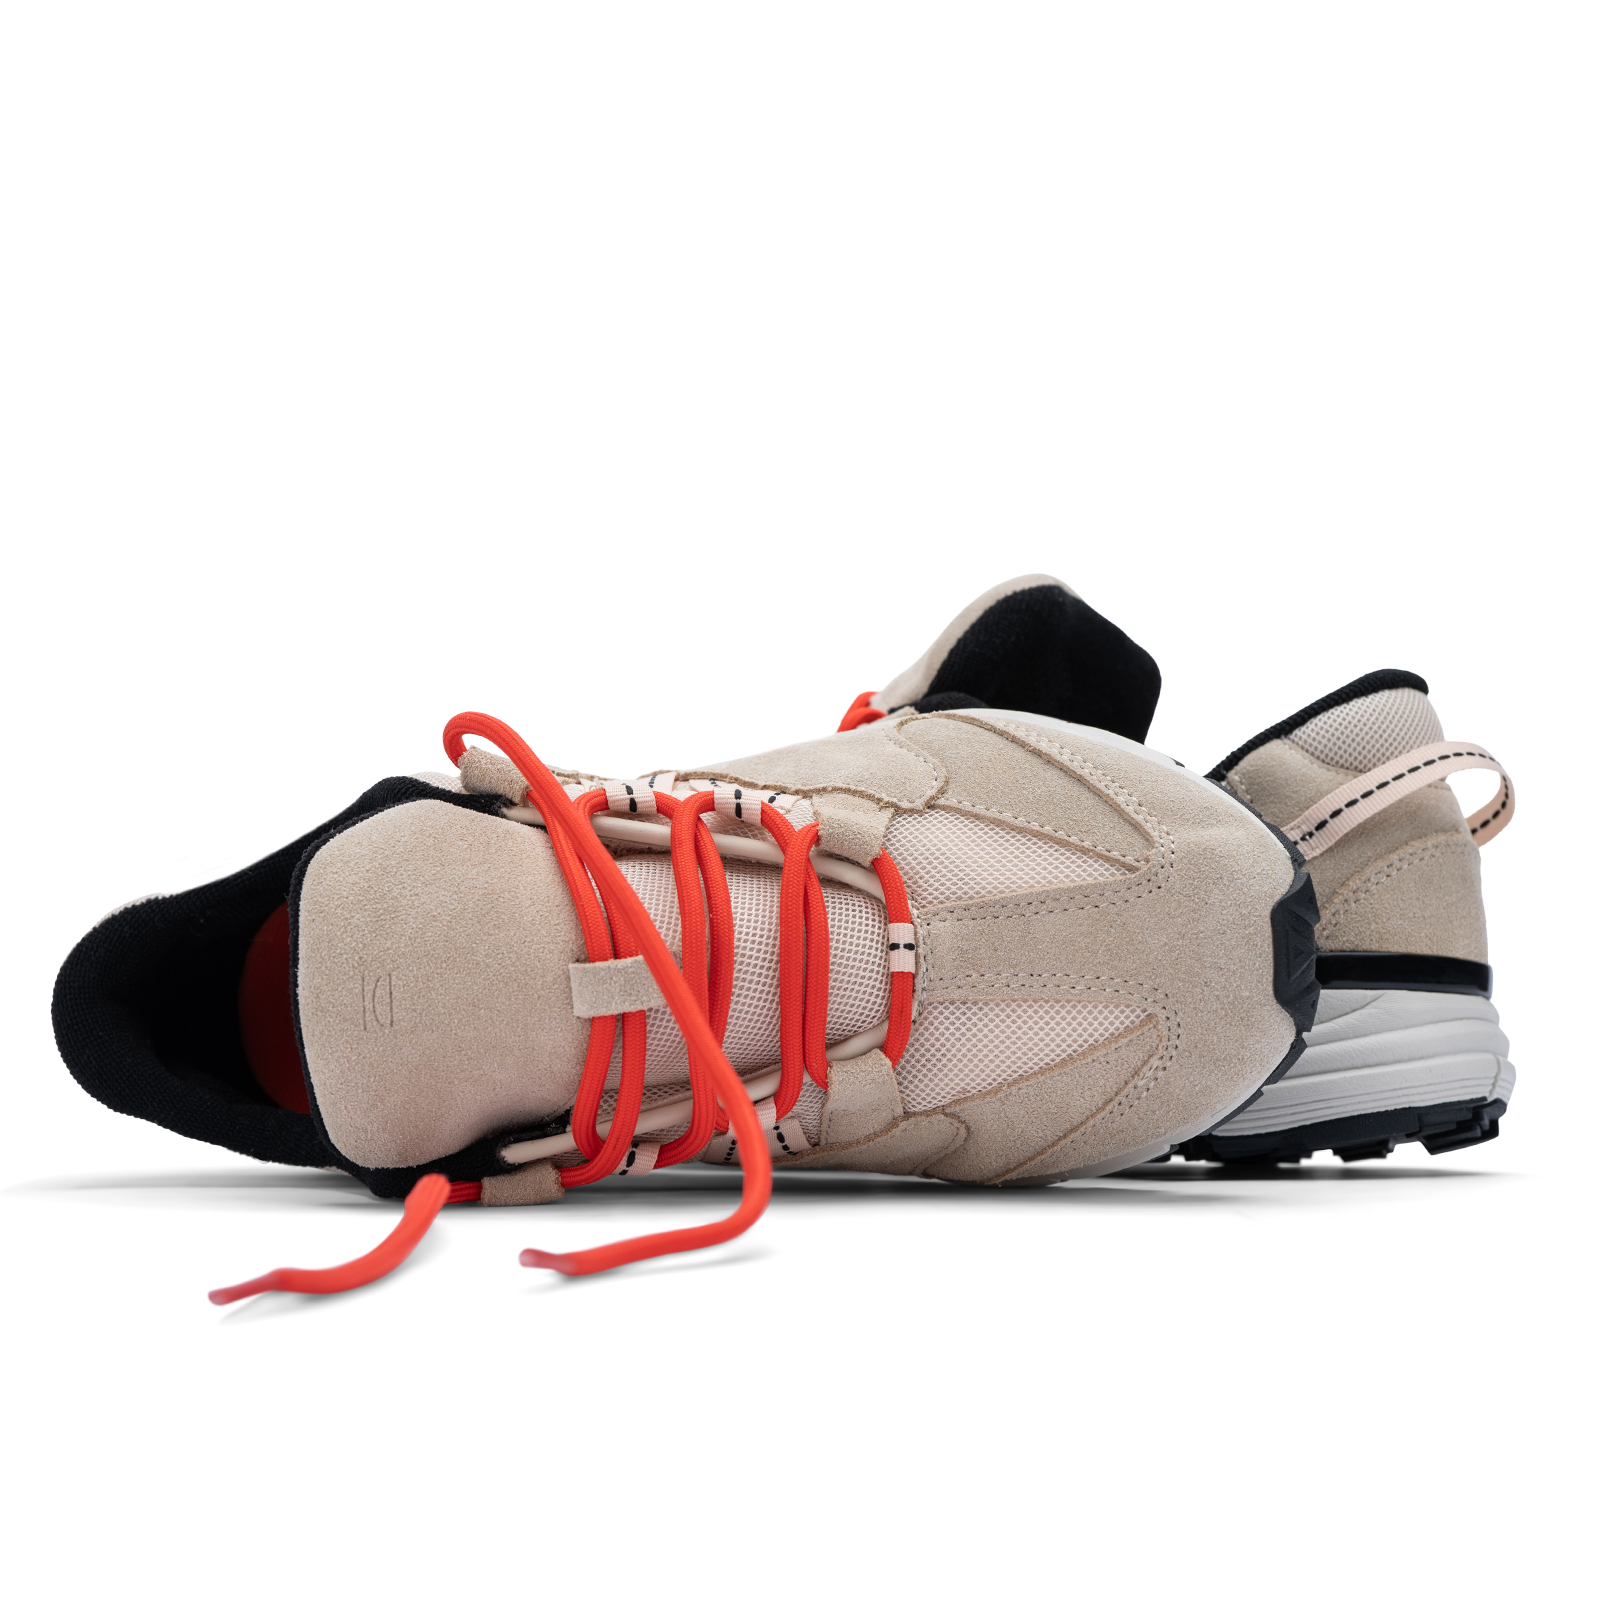 Altiutude / Safari top view khaki suede / air mesh / webbing lace holder with orange lace on a vibram sole